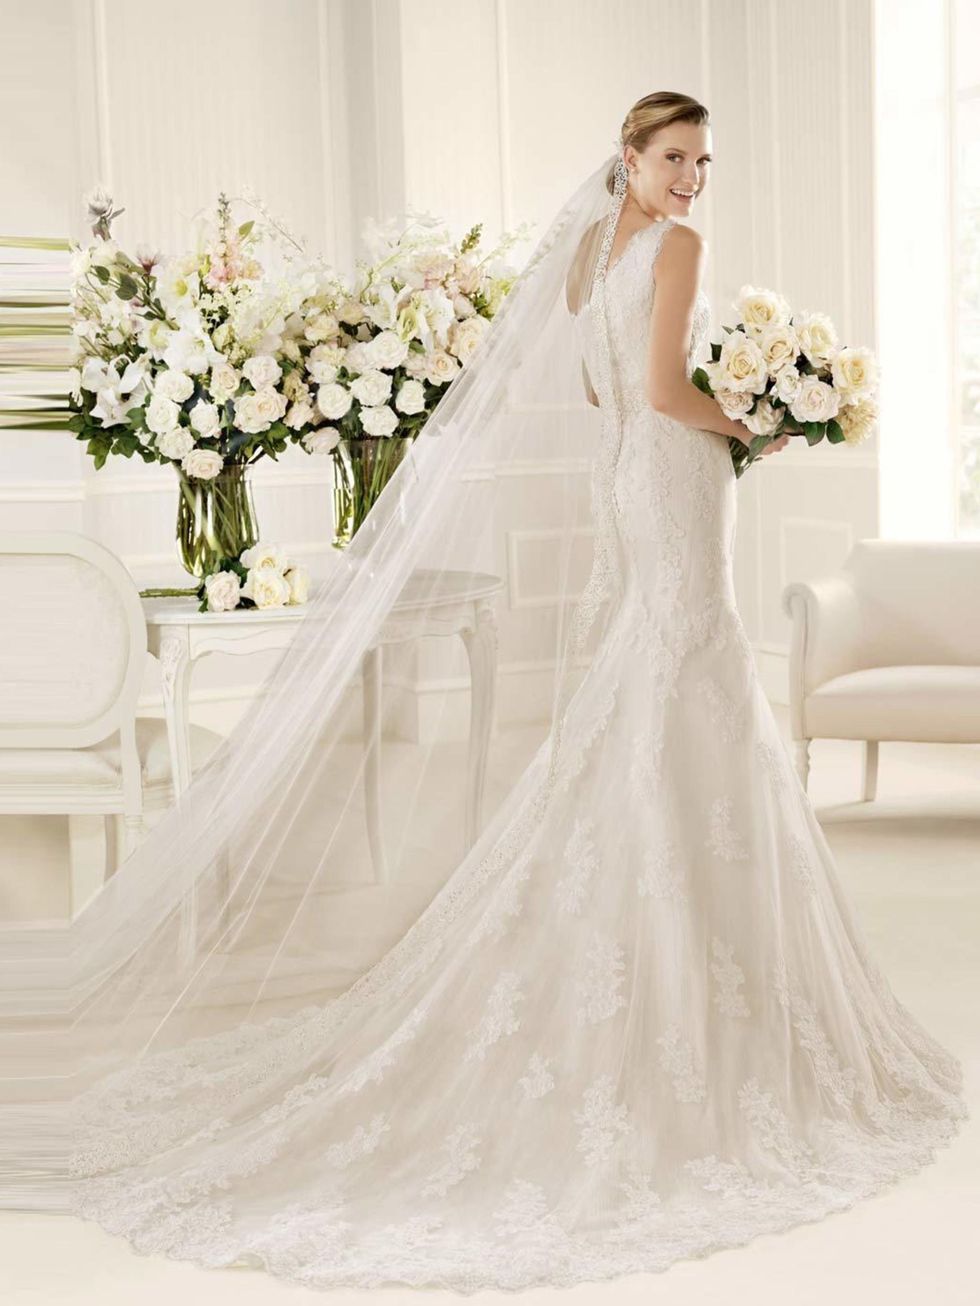 <p>January is <a href="http://www.elleuk.com/style/wedding-blog">bridal</a> sample sale time, with a host of covetable, big name designers and top bridal boutiques typically slashing their prices by up to 70 per cent in a bid to make way for new-season st